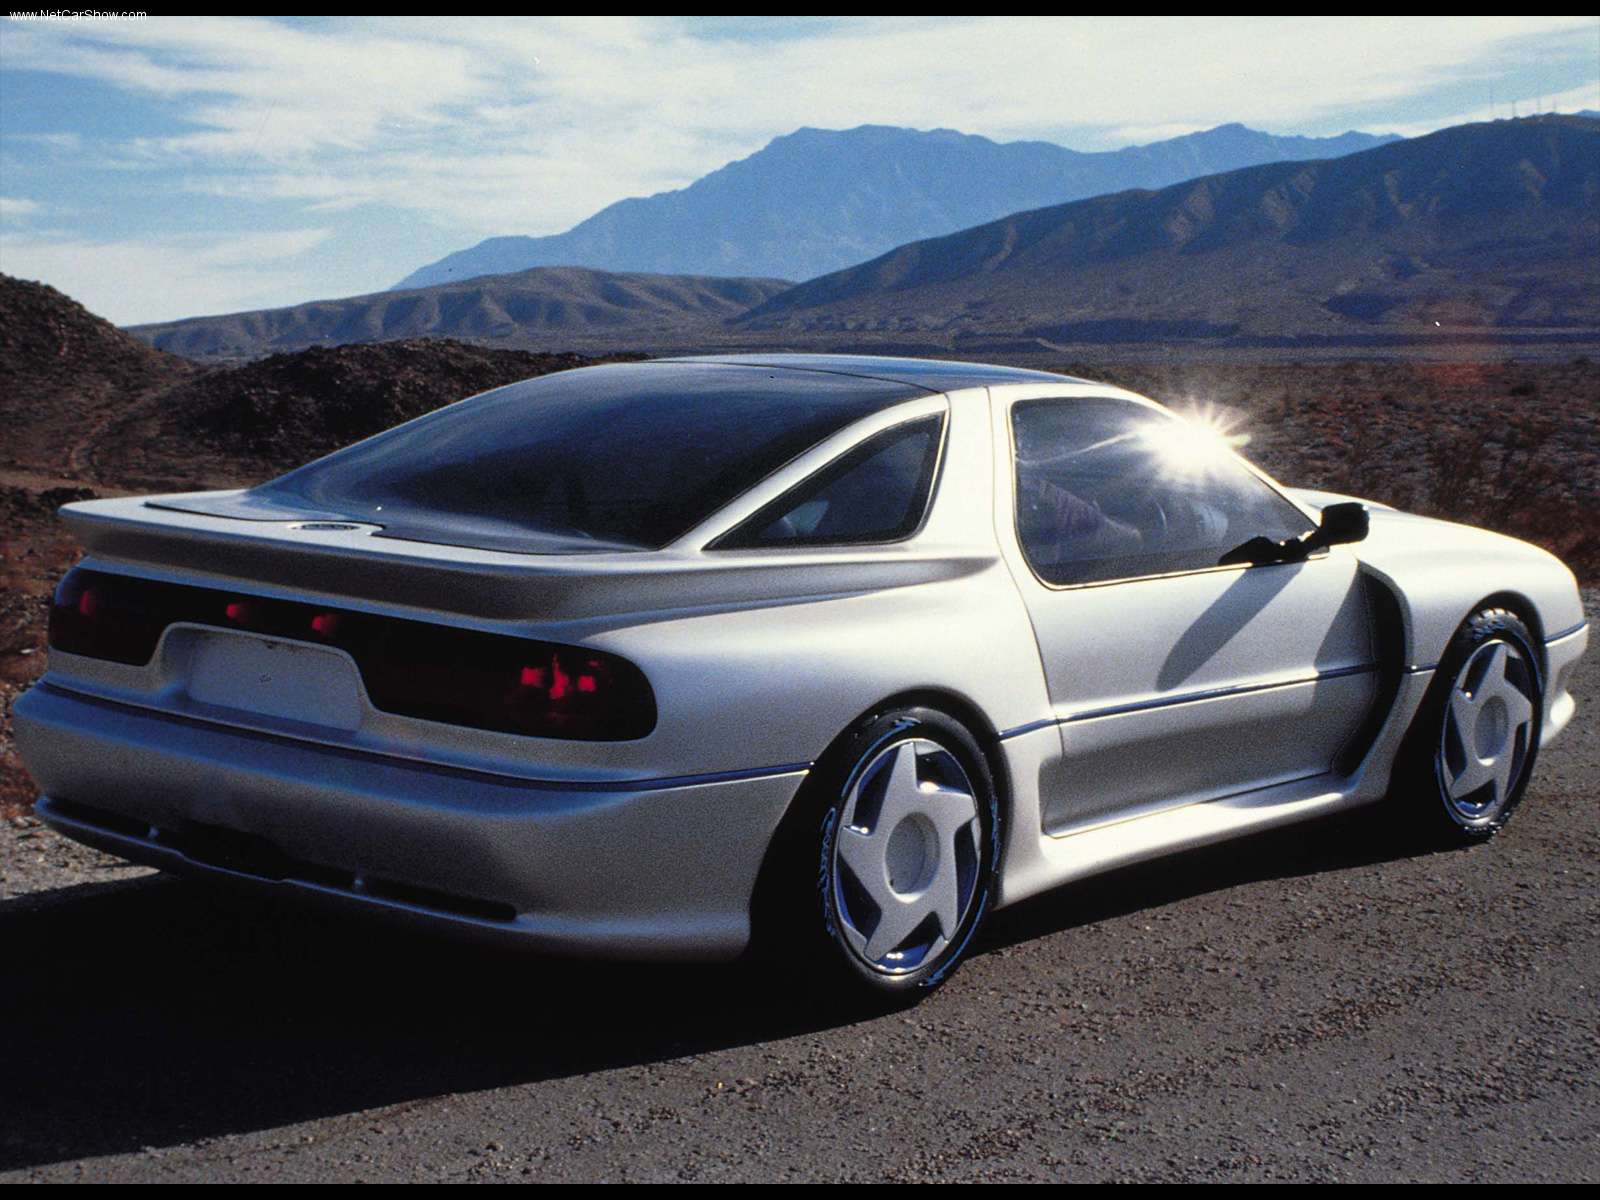 Dodge Daytona RT Concept (1990). Posted by Dodge.Wallpaper at 11:53 AM